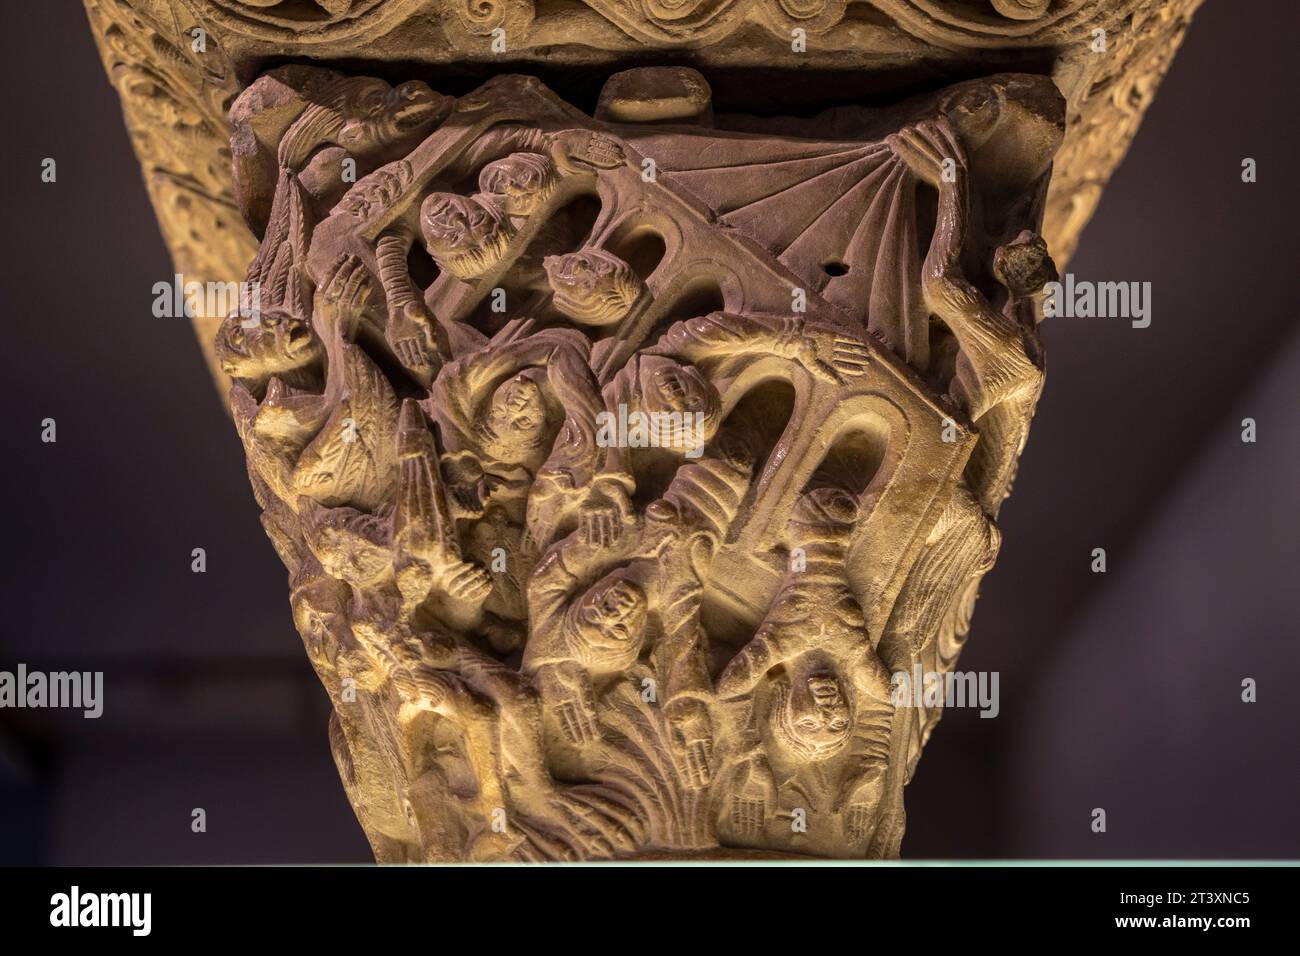 Romanesque capital with scene from the life of Job, 12th century, workshop of the master of the cloister of Pamplona cathedral, Museum of Navarra, Pamplona, Navarra,Spain. Stock Photo